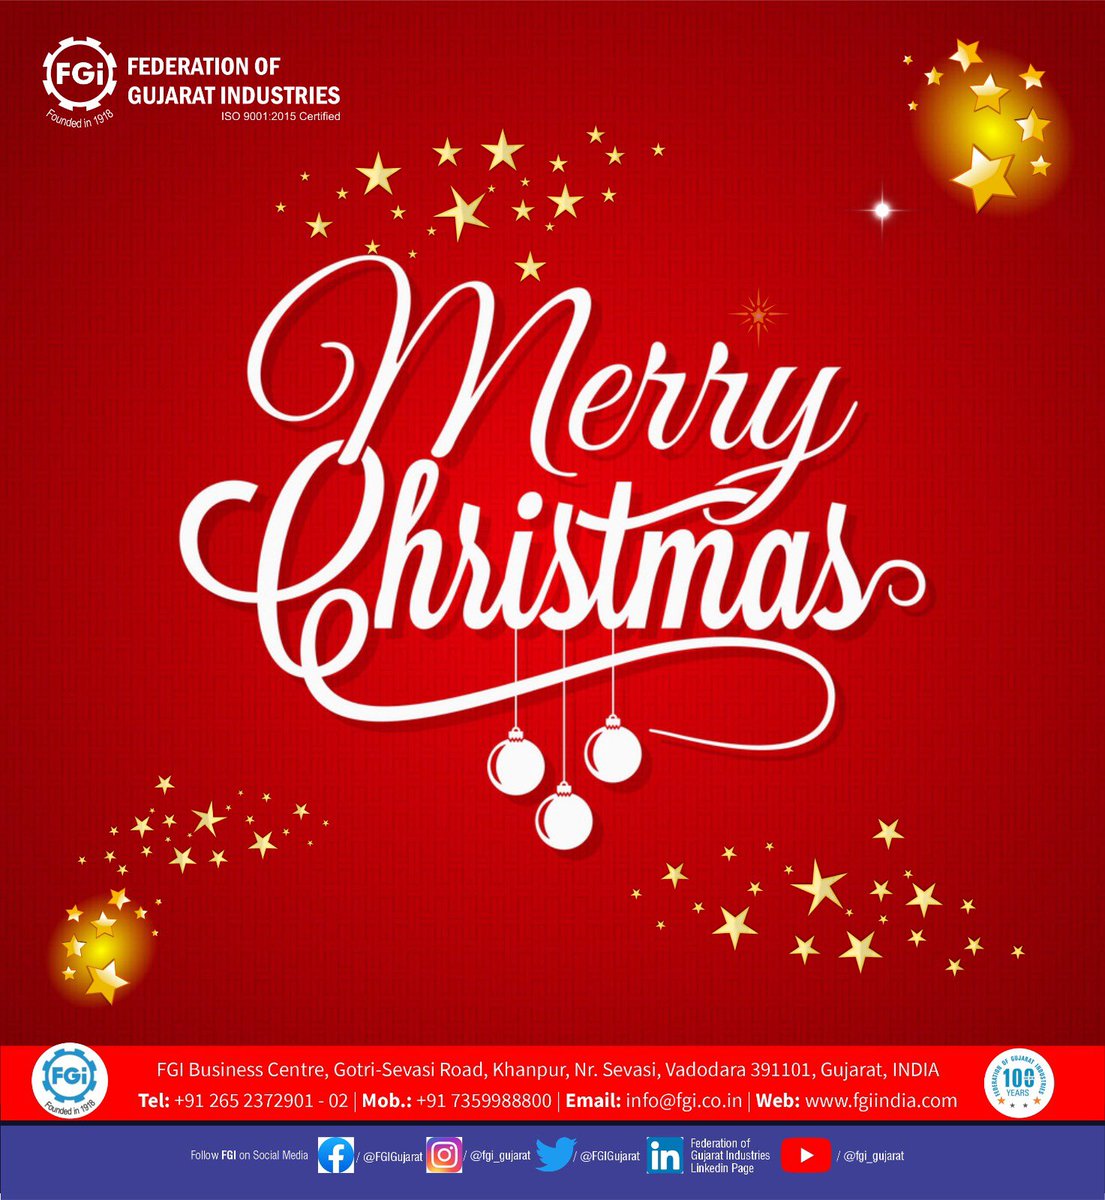 Federation of Gujarat Industries (FGI) wishes you all a merry and joyous Christmas 🎄💫